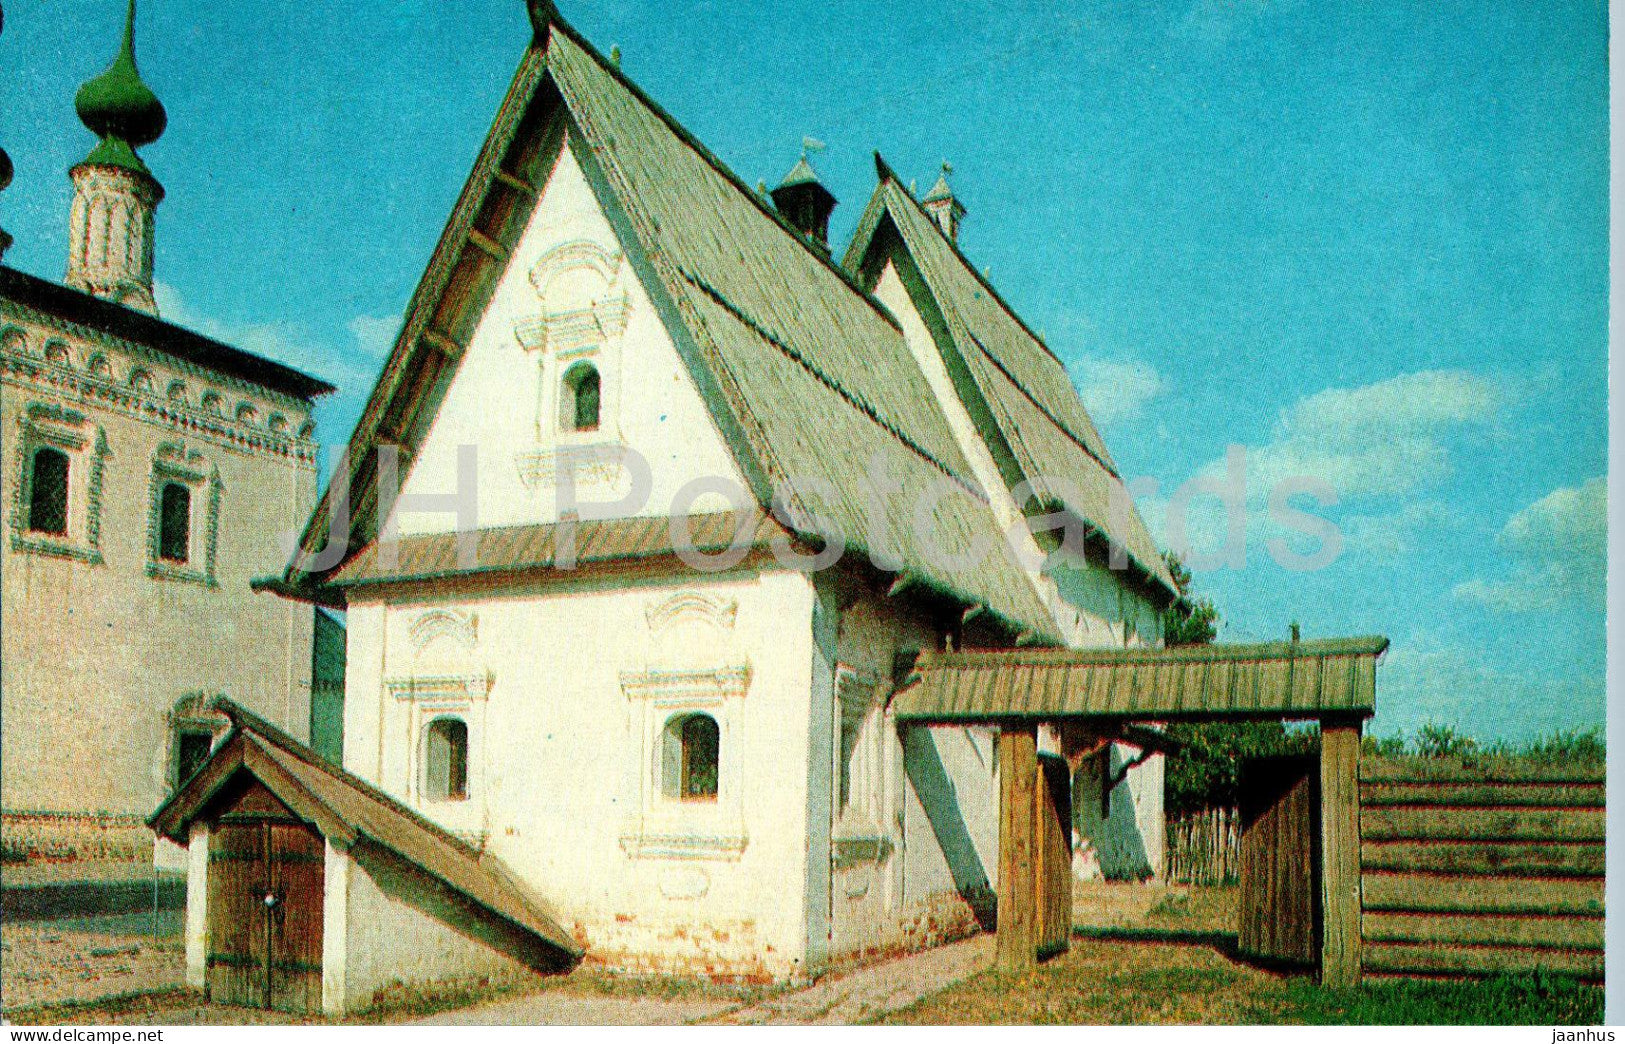 Suzdal - A 17th Century House - 1979 - Russia USSR - unused - JH Postcards